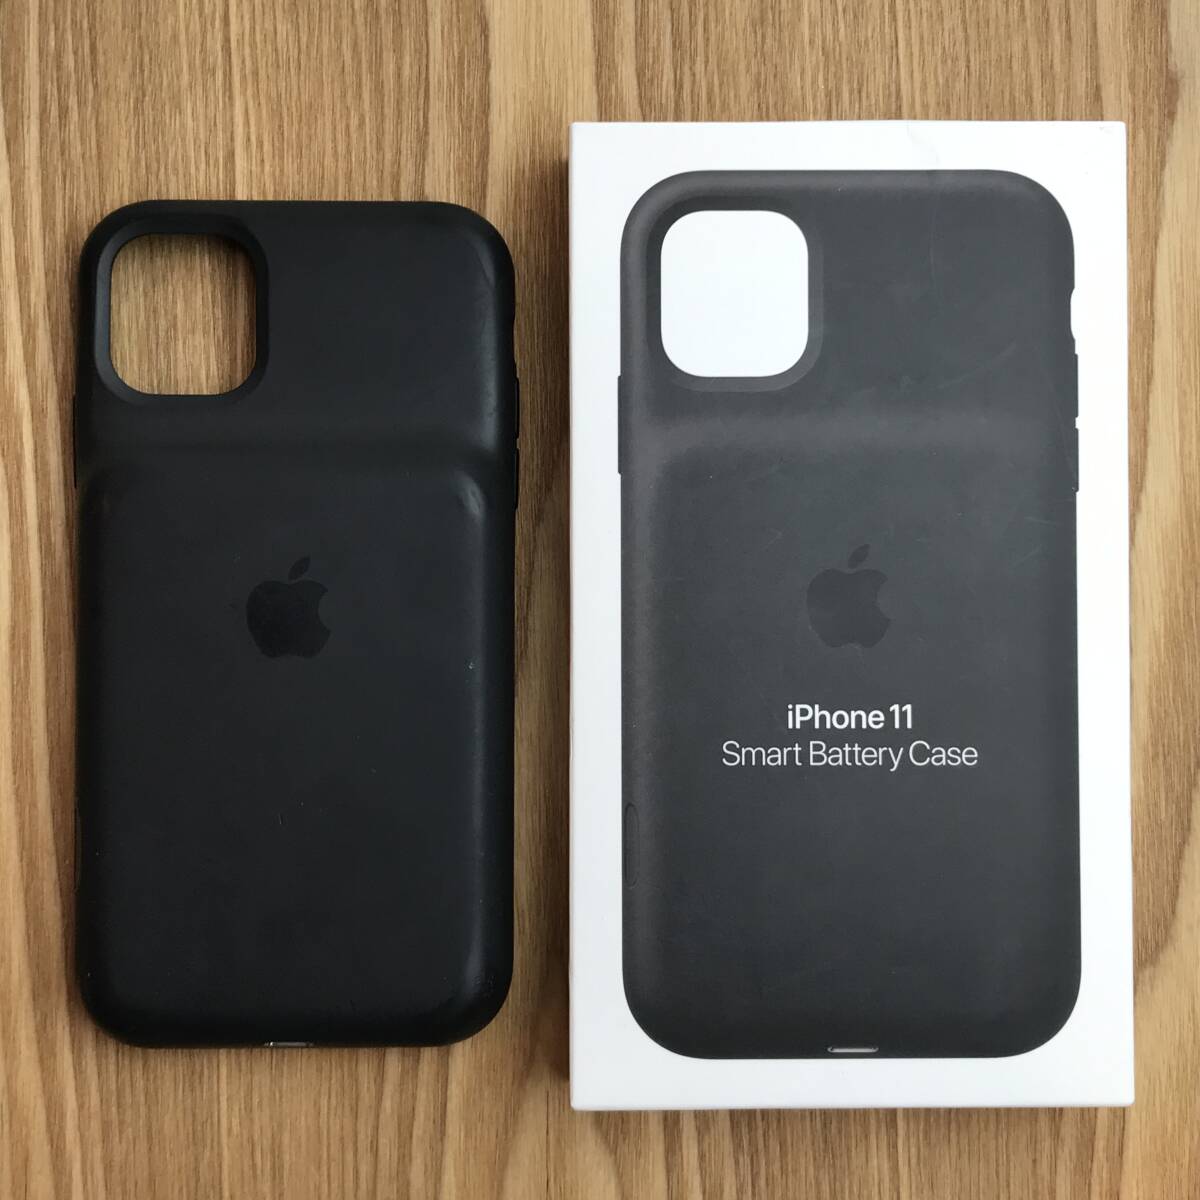 APPLE純正 iPhone 11 Smart Battery Case with Wireless Charging スマートバッテリーケース ワイヤレスチャージング ブラックの画像1